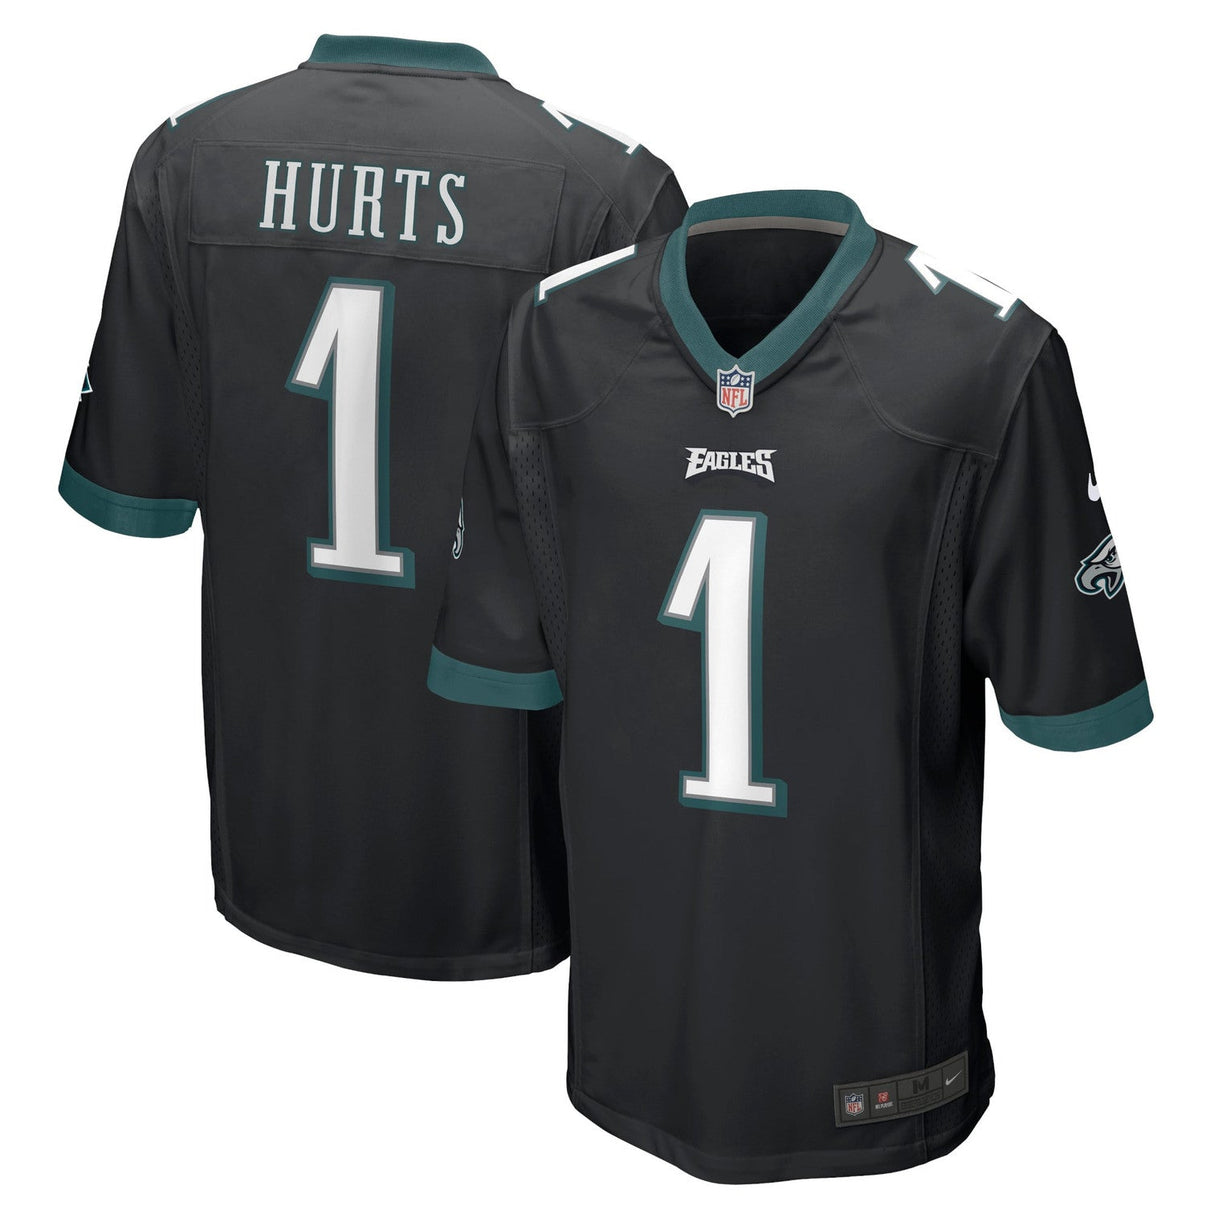 Jalen Hurts Philadelphia Eagles Jersey - Jersey and Sneakers